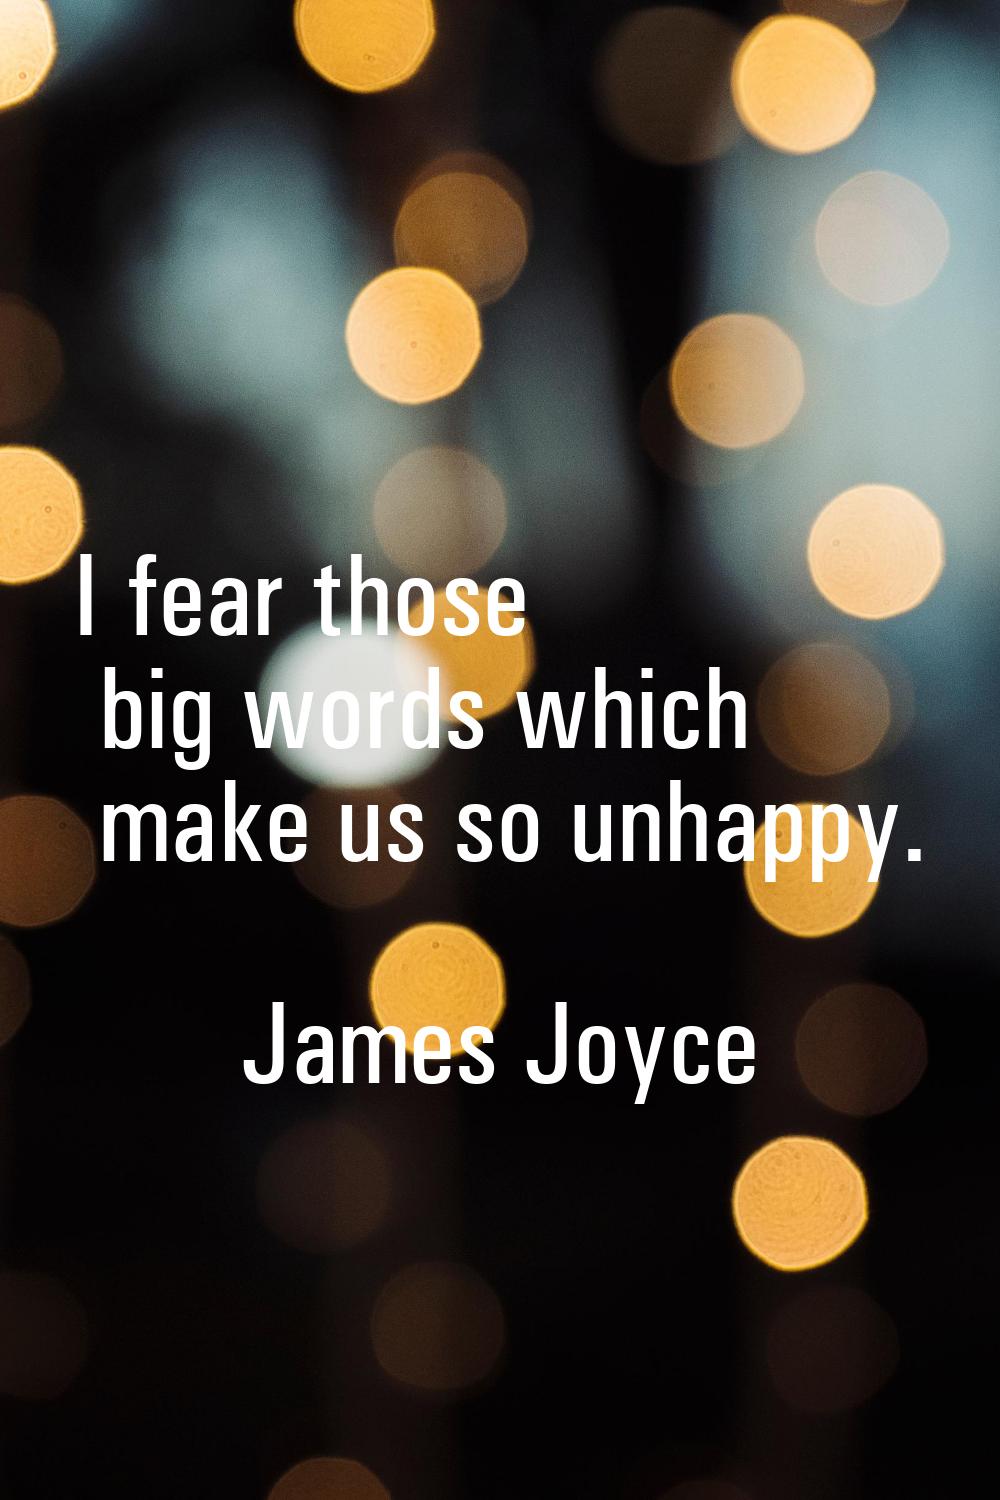 I fear those big words which make us so unhappy.